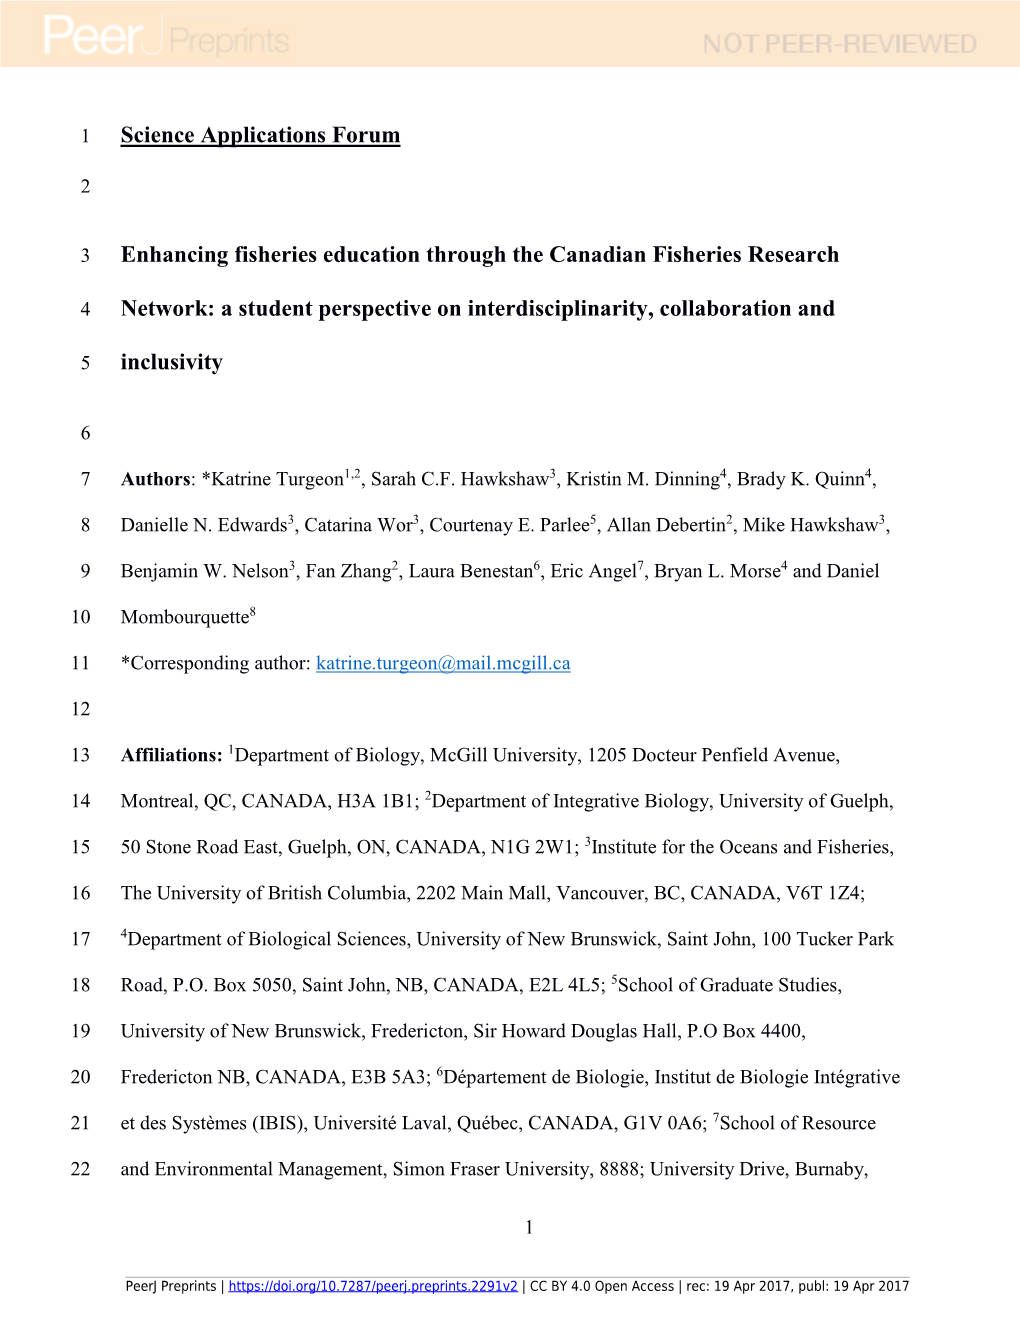 Enhancing Fisheries Education Through the Canadian Fisheries Research Network: a Student Perspective on Interdisciplinarity